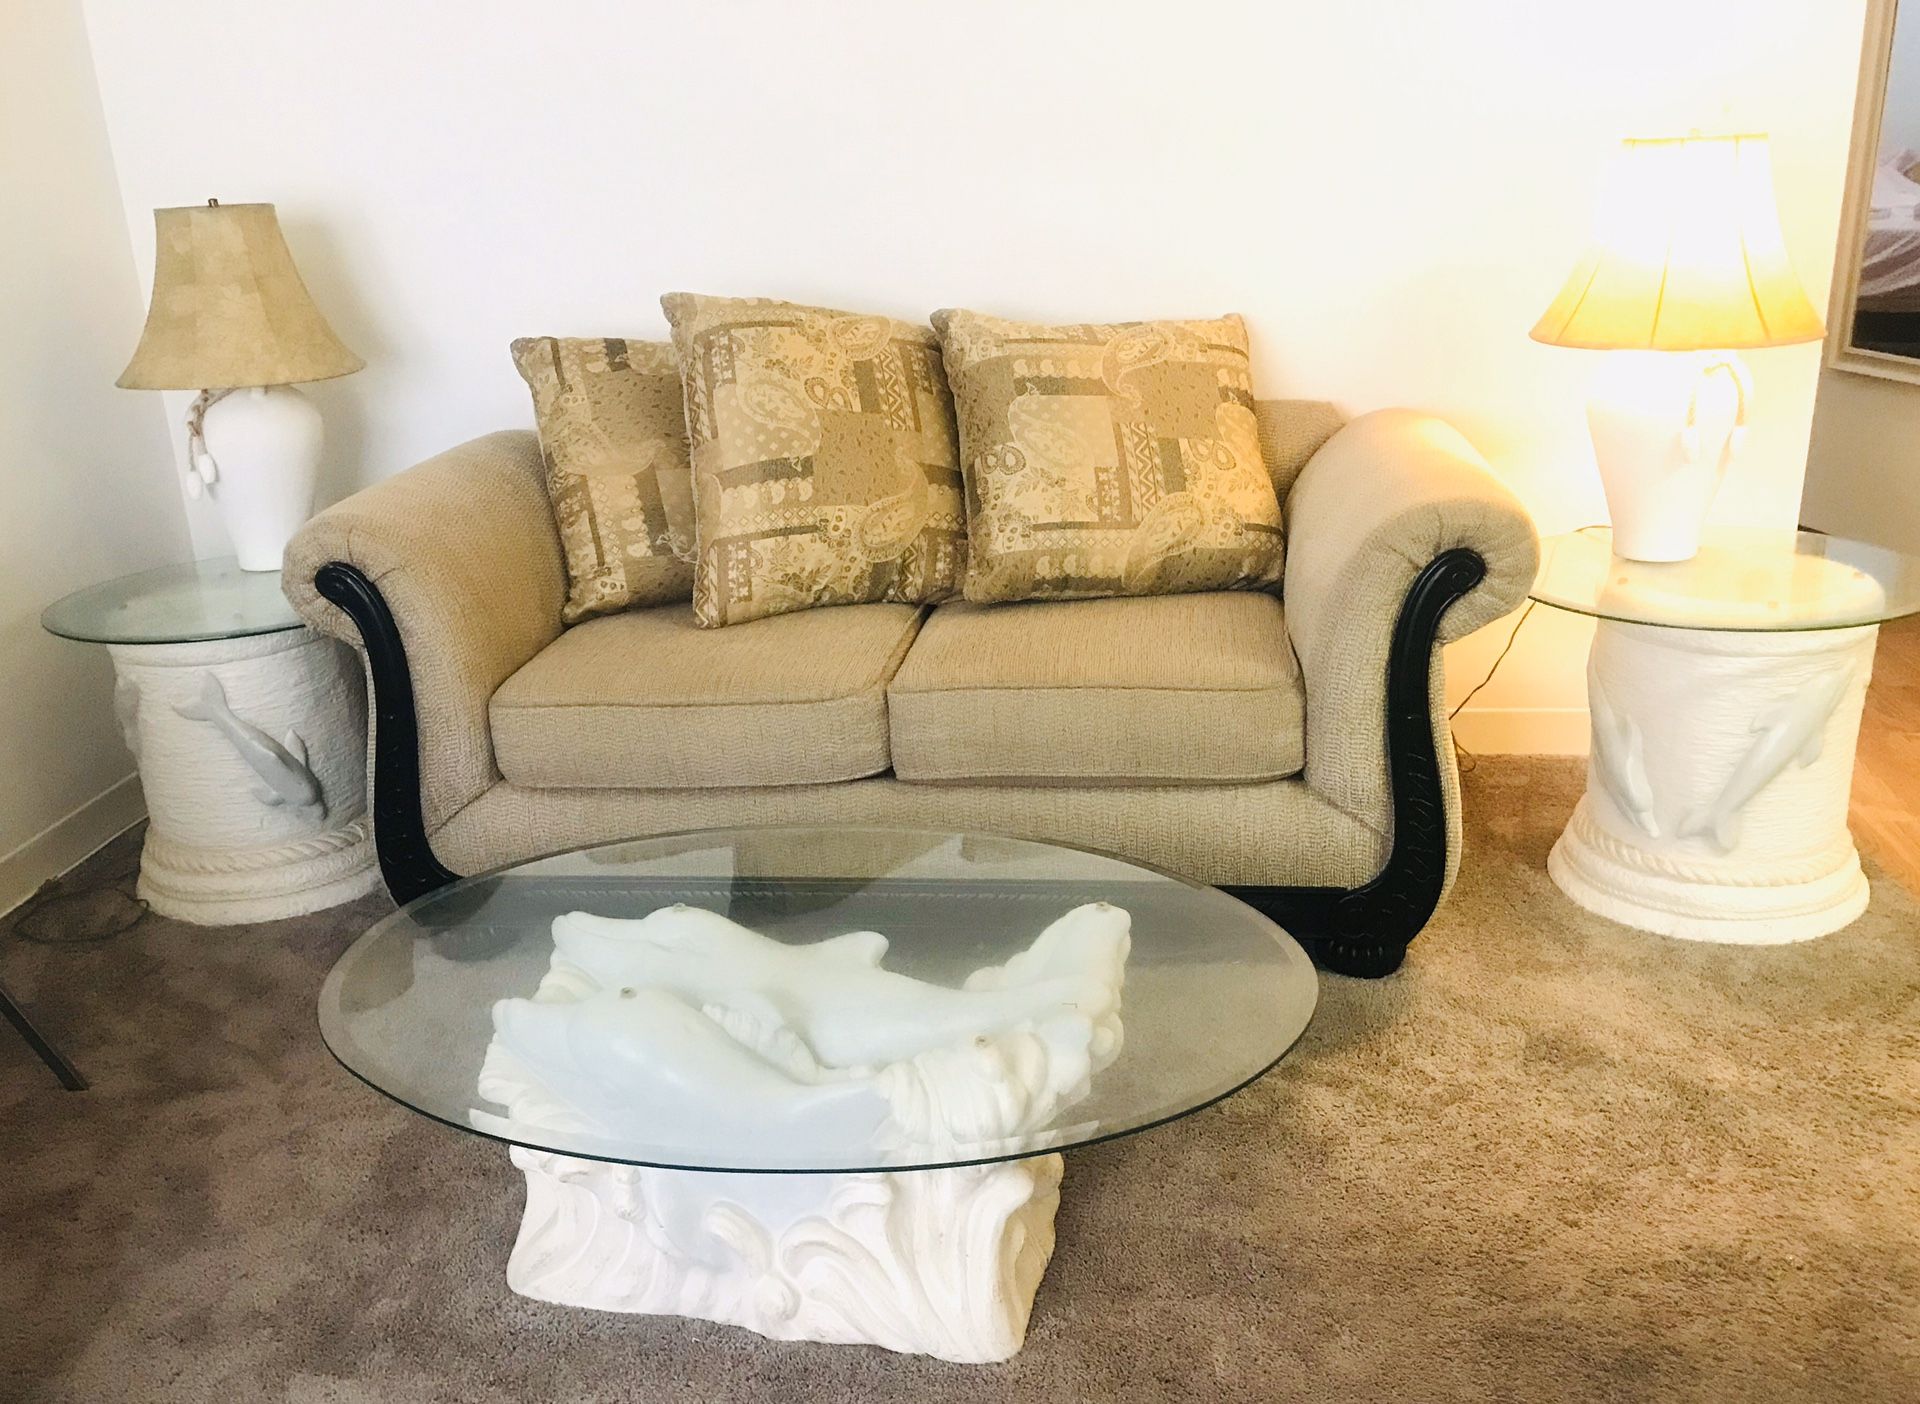 Beige sofa, glass top coffee table & side tables, 2 lamps, and wooden swivel off white chair